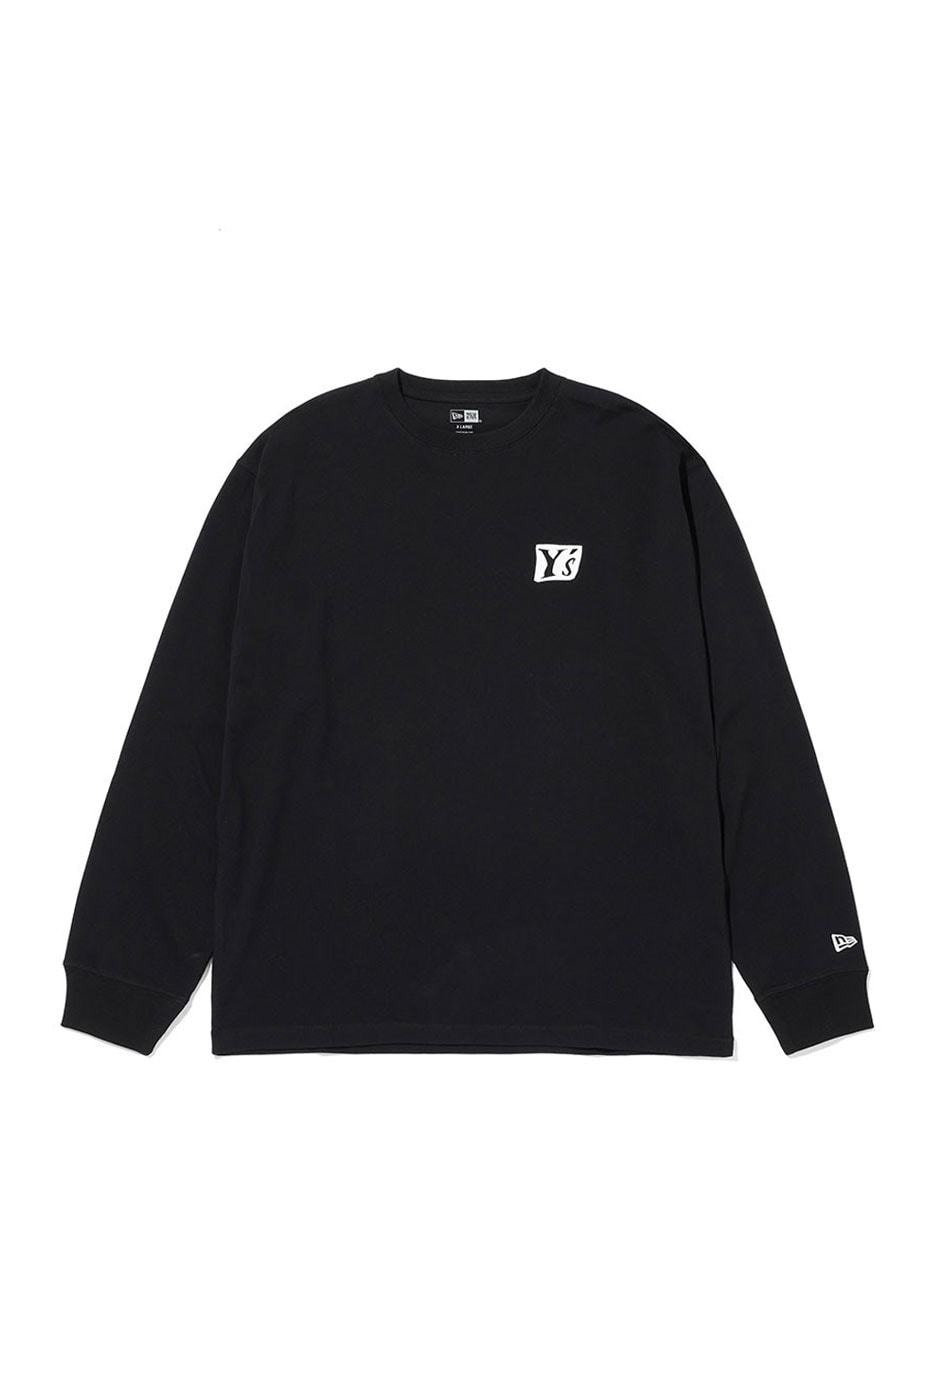 Y's by Yohji Yamamoto new era march 19 9thirty goretex pullover hoodies long sleeve cotton tees paclite bucket hats spring summer 2022 release info date price